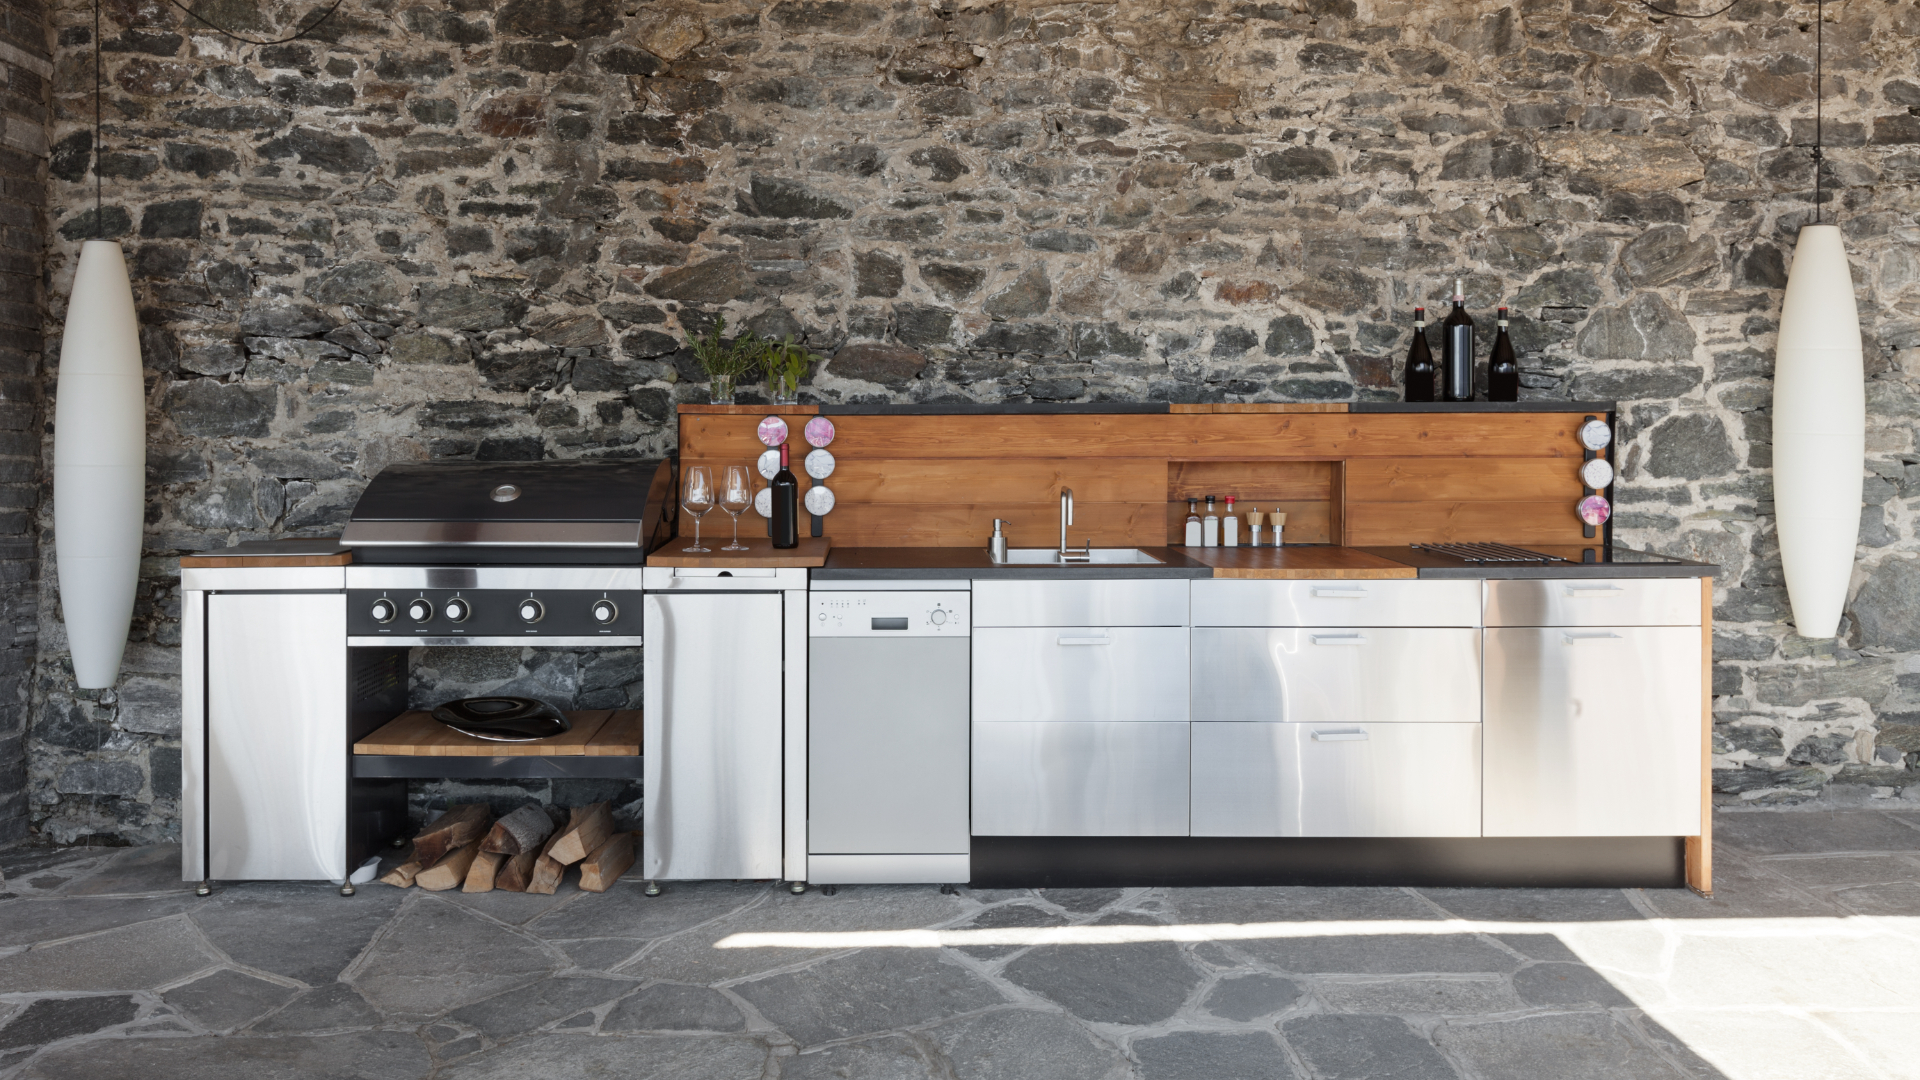 Take Your Outdoor Kitchen to the Next Level With These 5 Additions